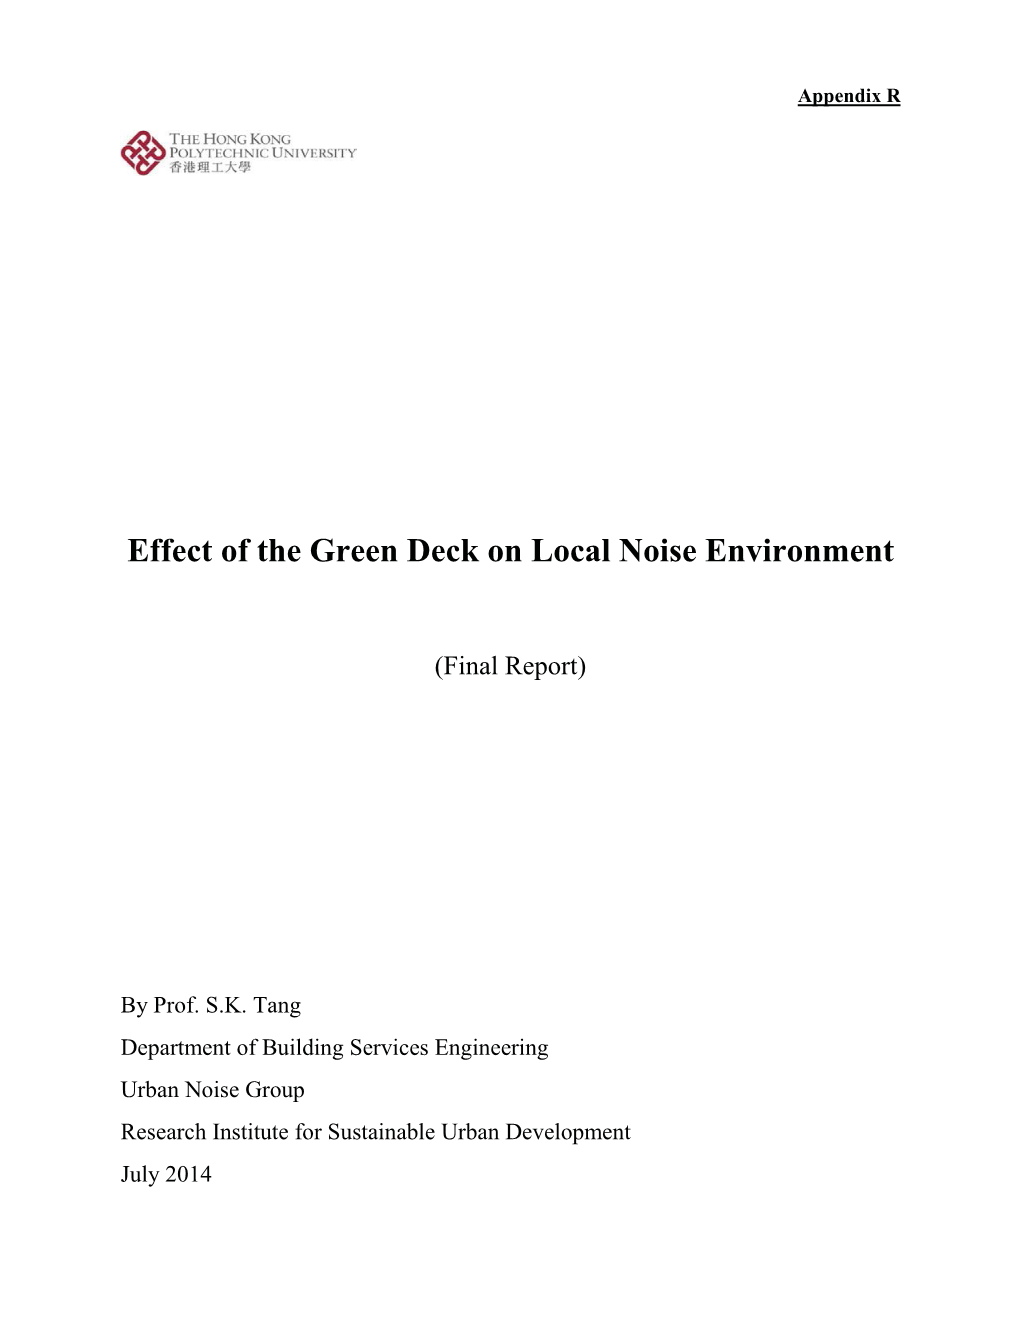 Effect of the Green Deck on Local Noise Environment